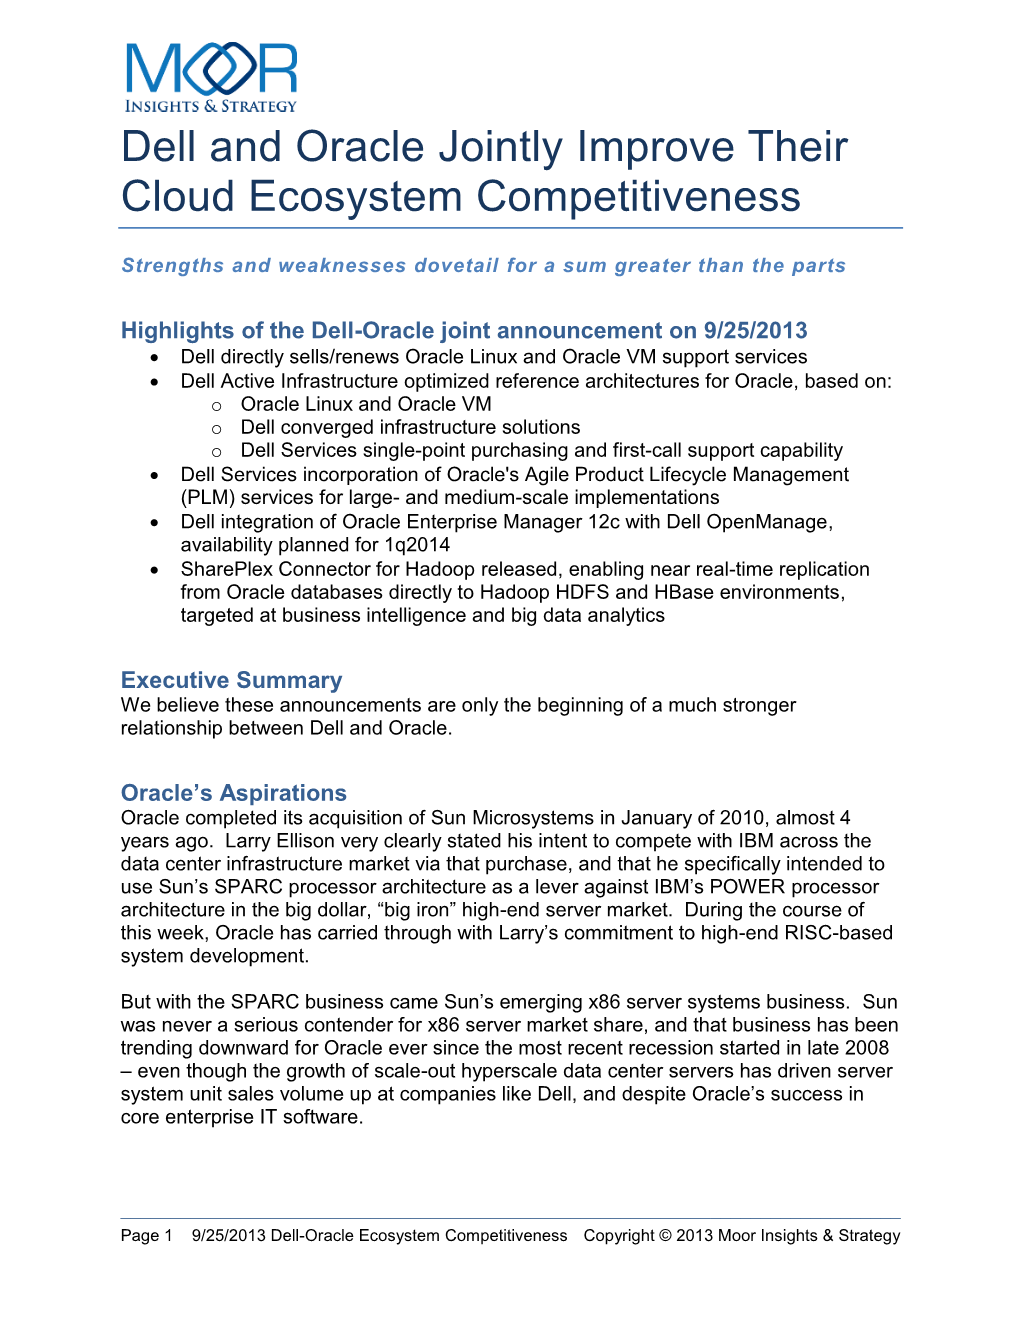 Dell and Oracle Jointly Improve Their Cloud Ecosystem Competitiveness